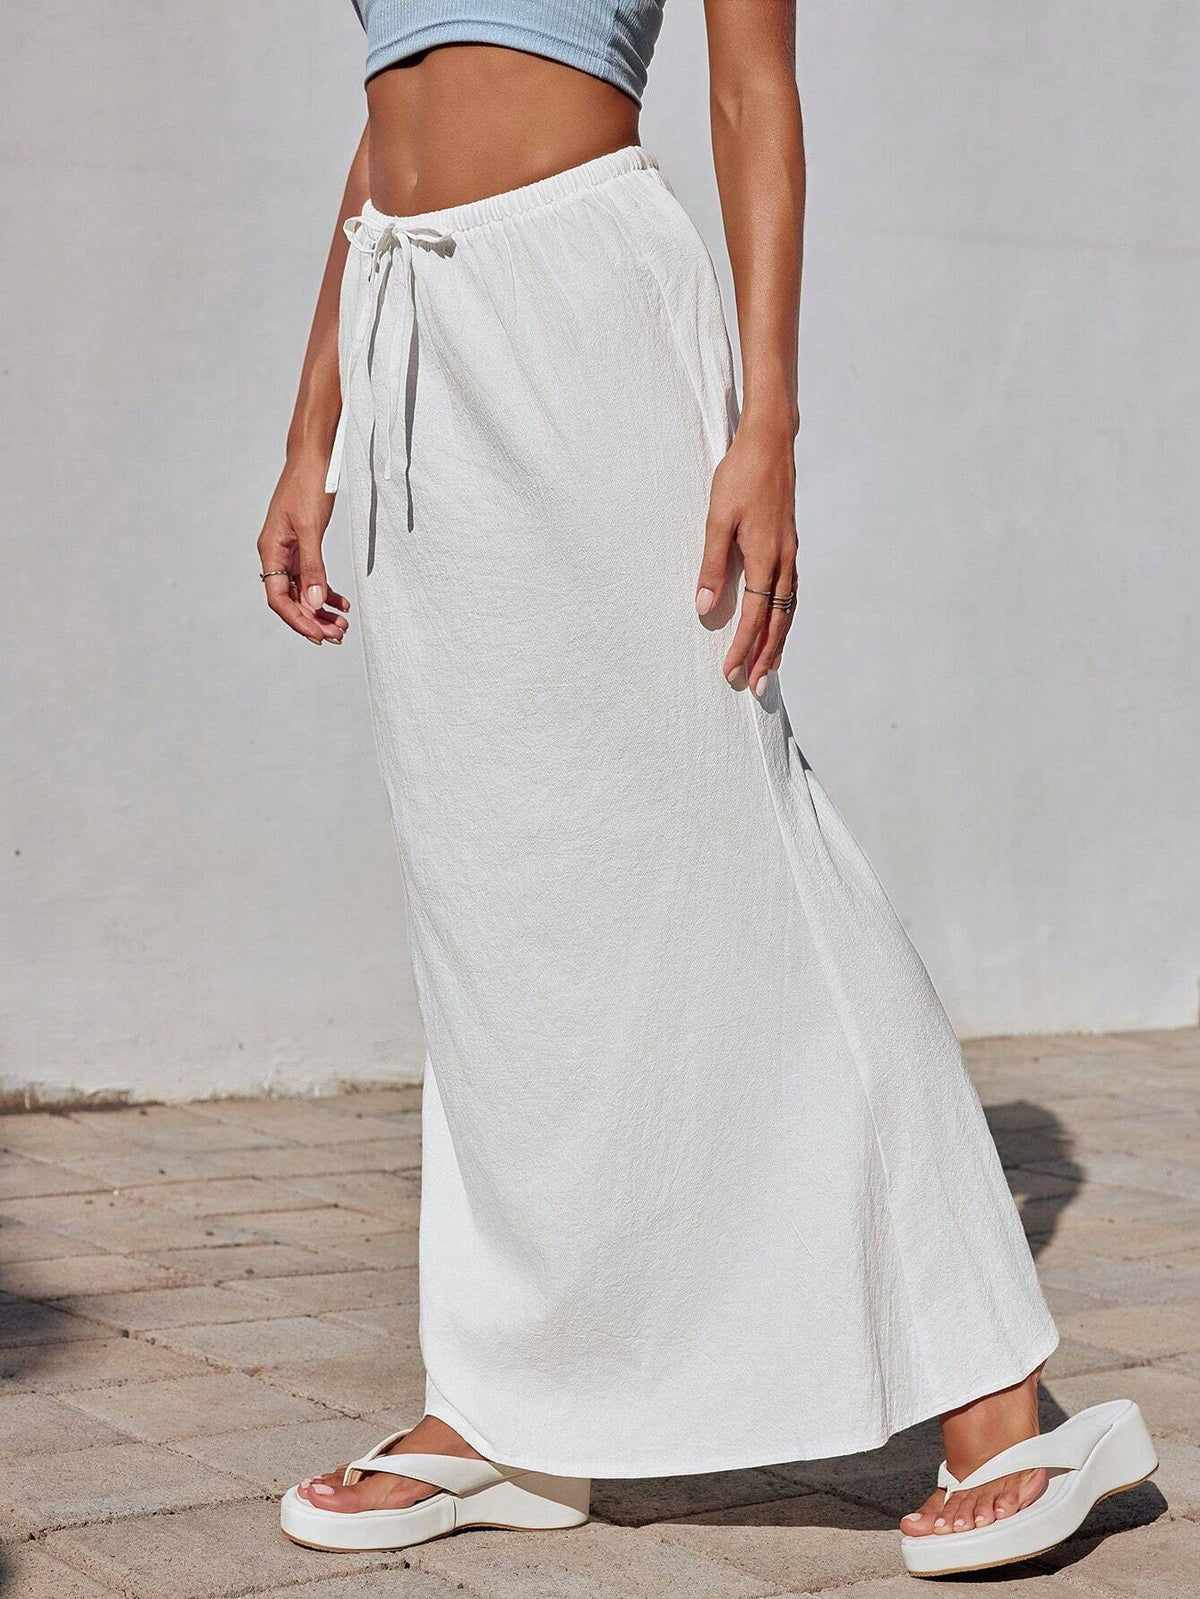 EZwear Spring And Summer Vacation White Cotton And Linen Mermaid Long Skirt